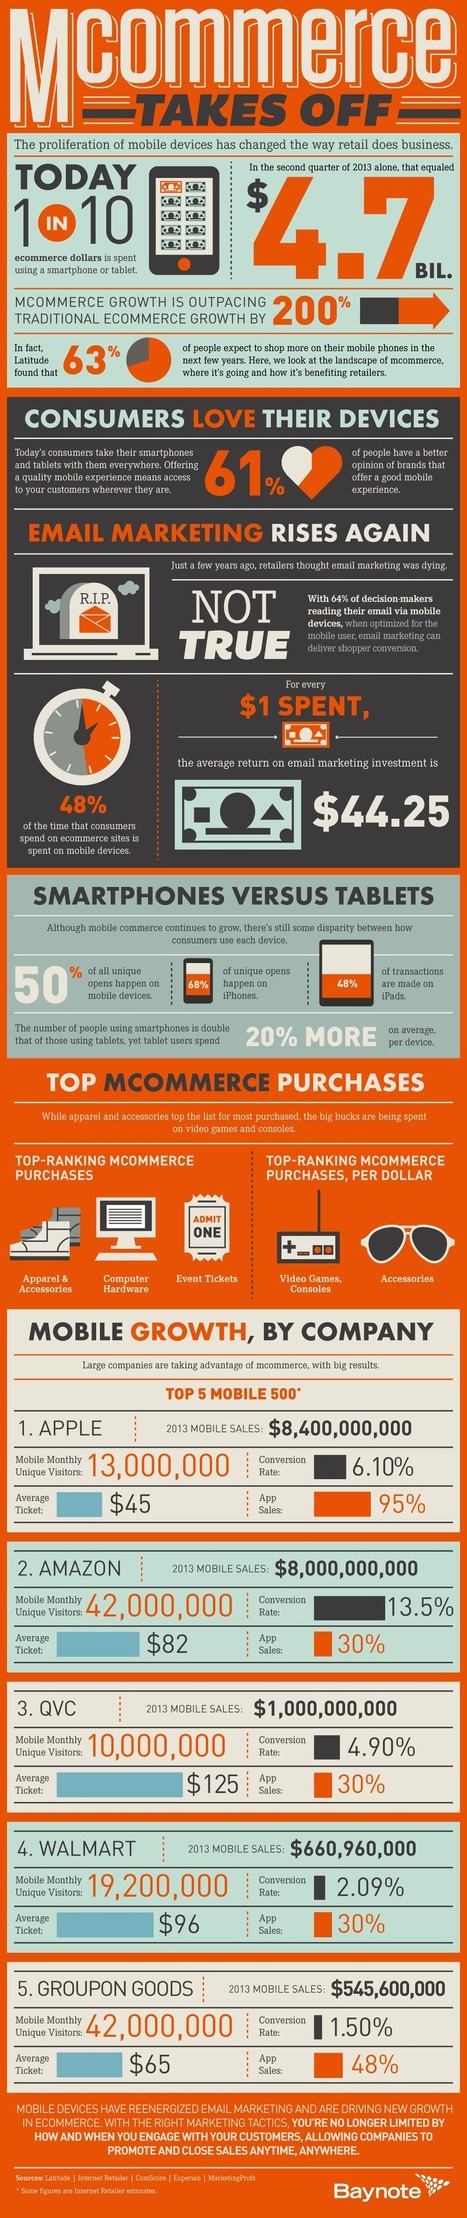 Infographic: MCommerce Growing 200% Faster than ECommerce | Information Technology & Social Media News | Scoop.it